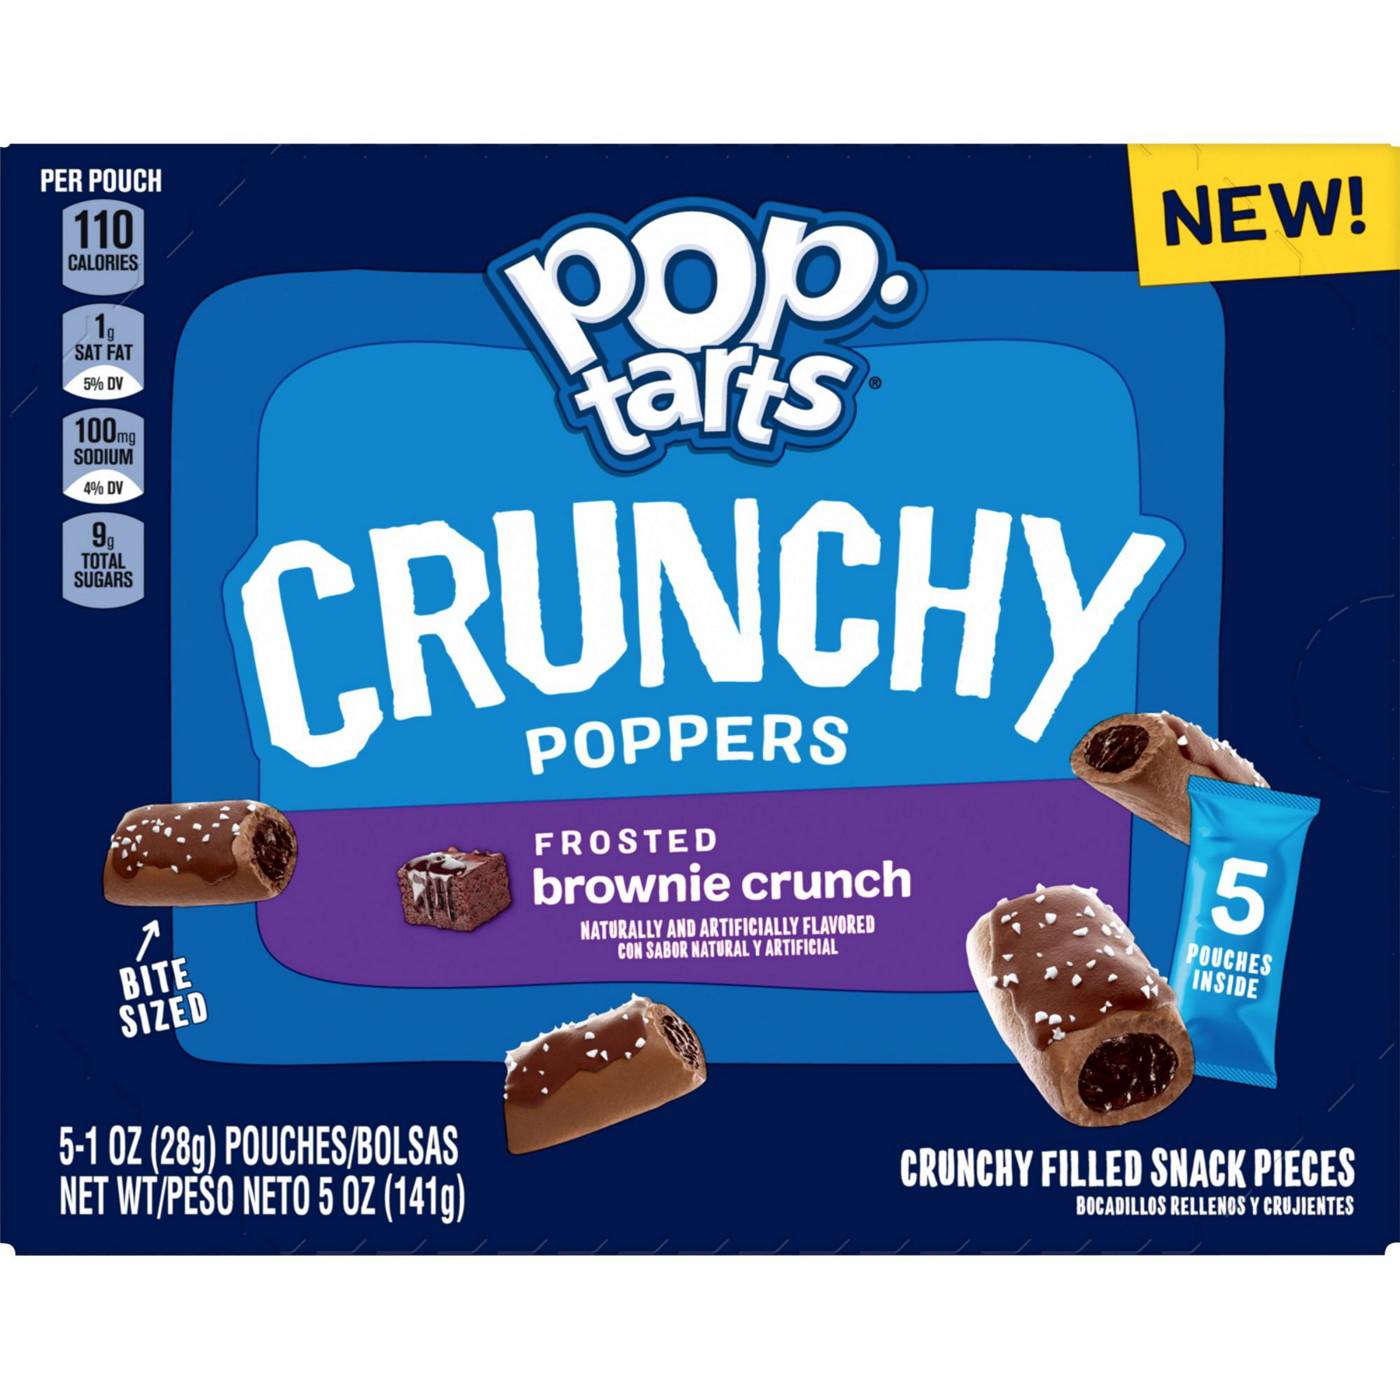 Pop-Tarts Crunchy Poppers Frosted Brownie Crunch Crunchy Filled Snack Pieces; image 5 of 6